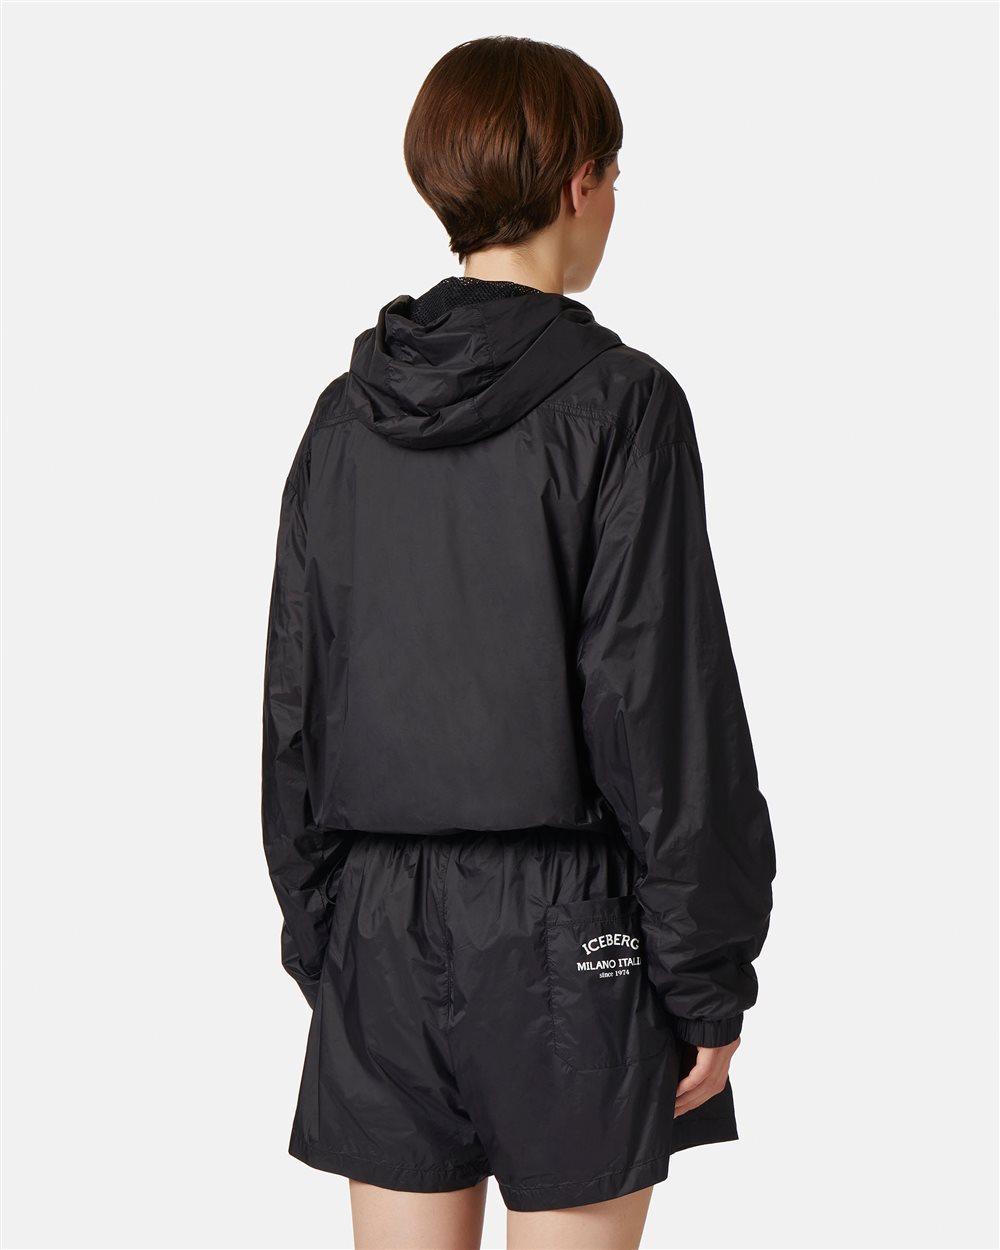 Active style jacket - Iceberg - Official Website